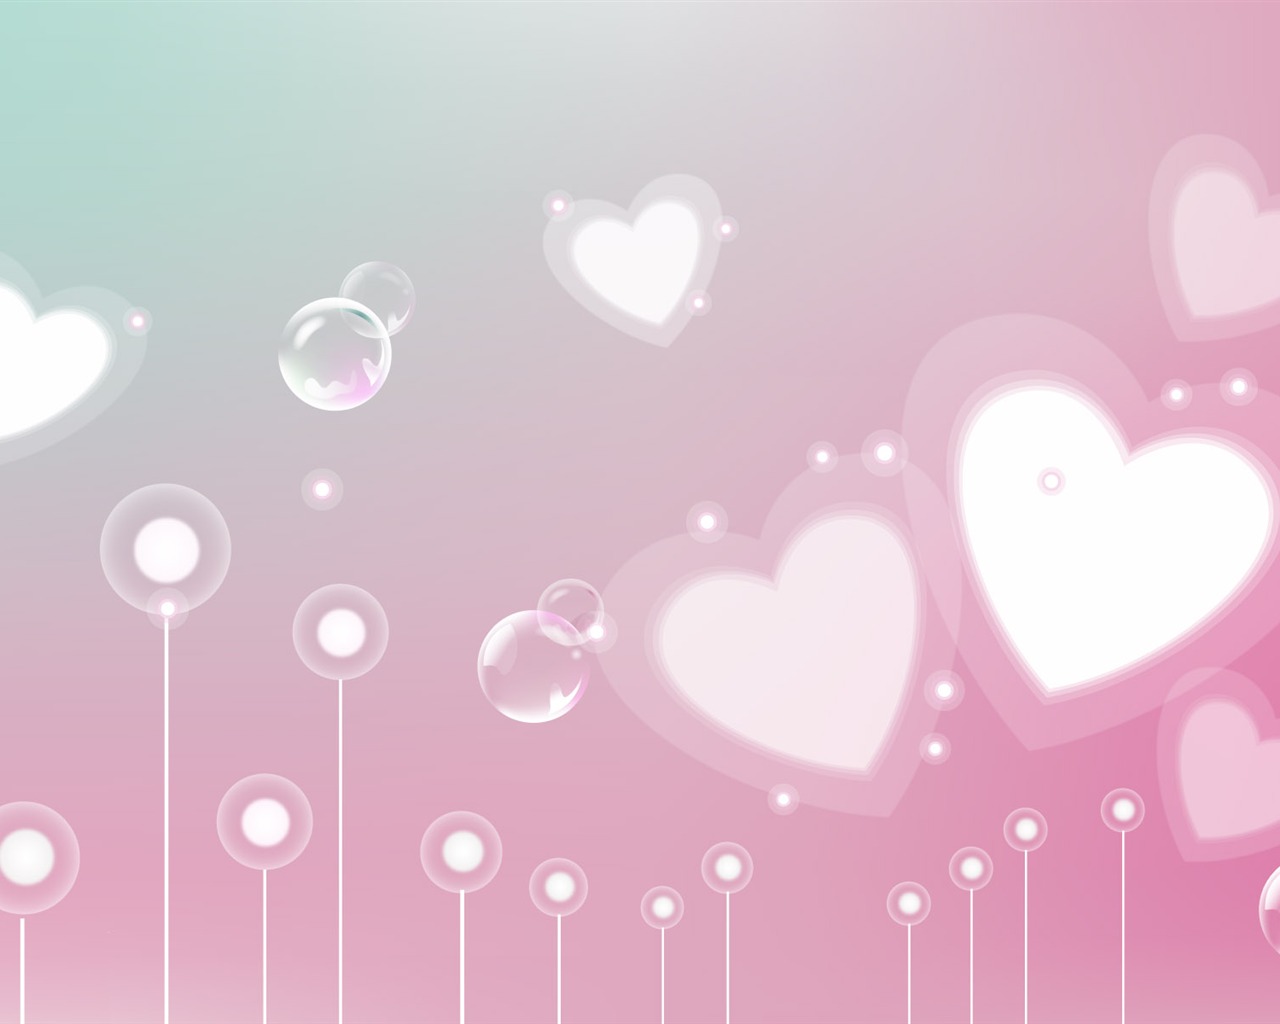 Valentine's Day Love Theme Wallpapers (2) #18 - 1280x1024